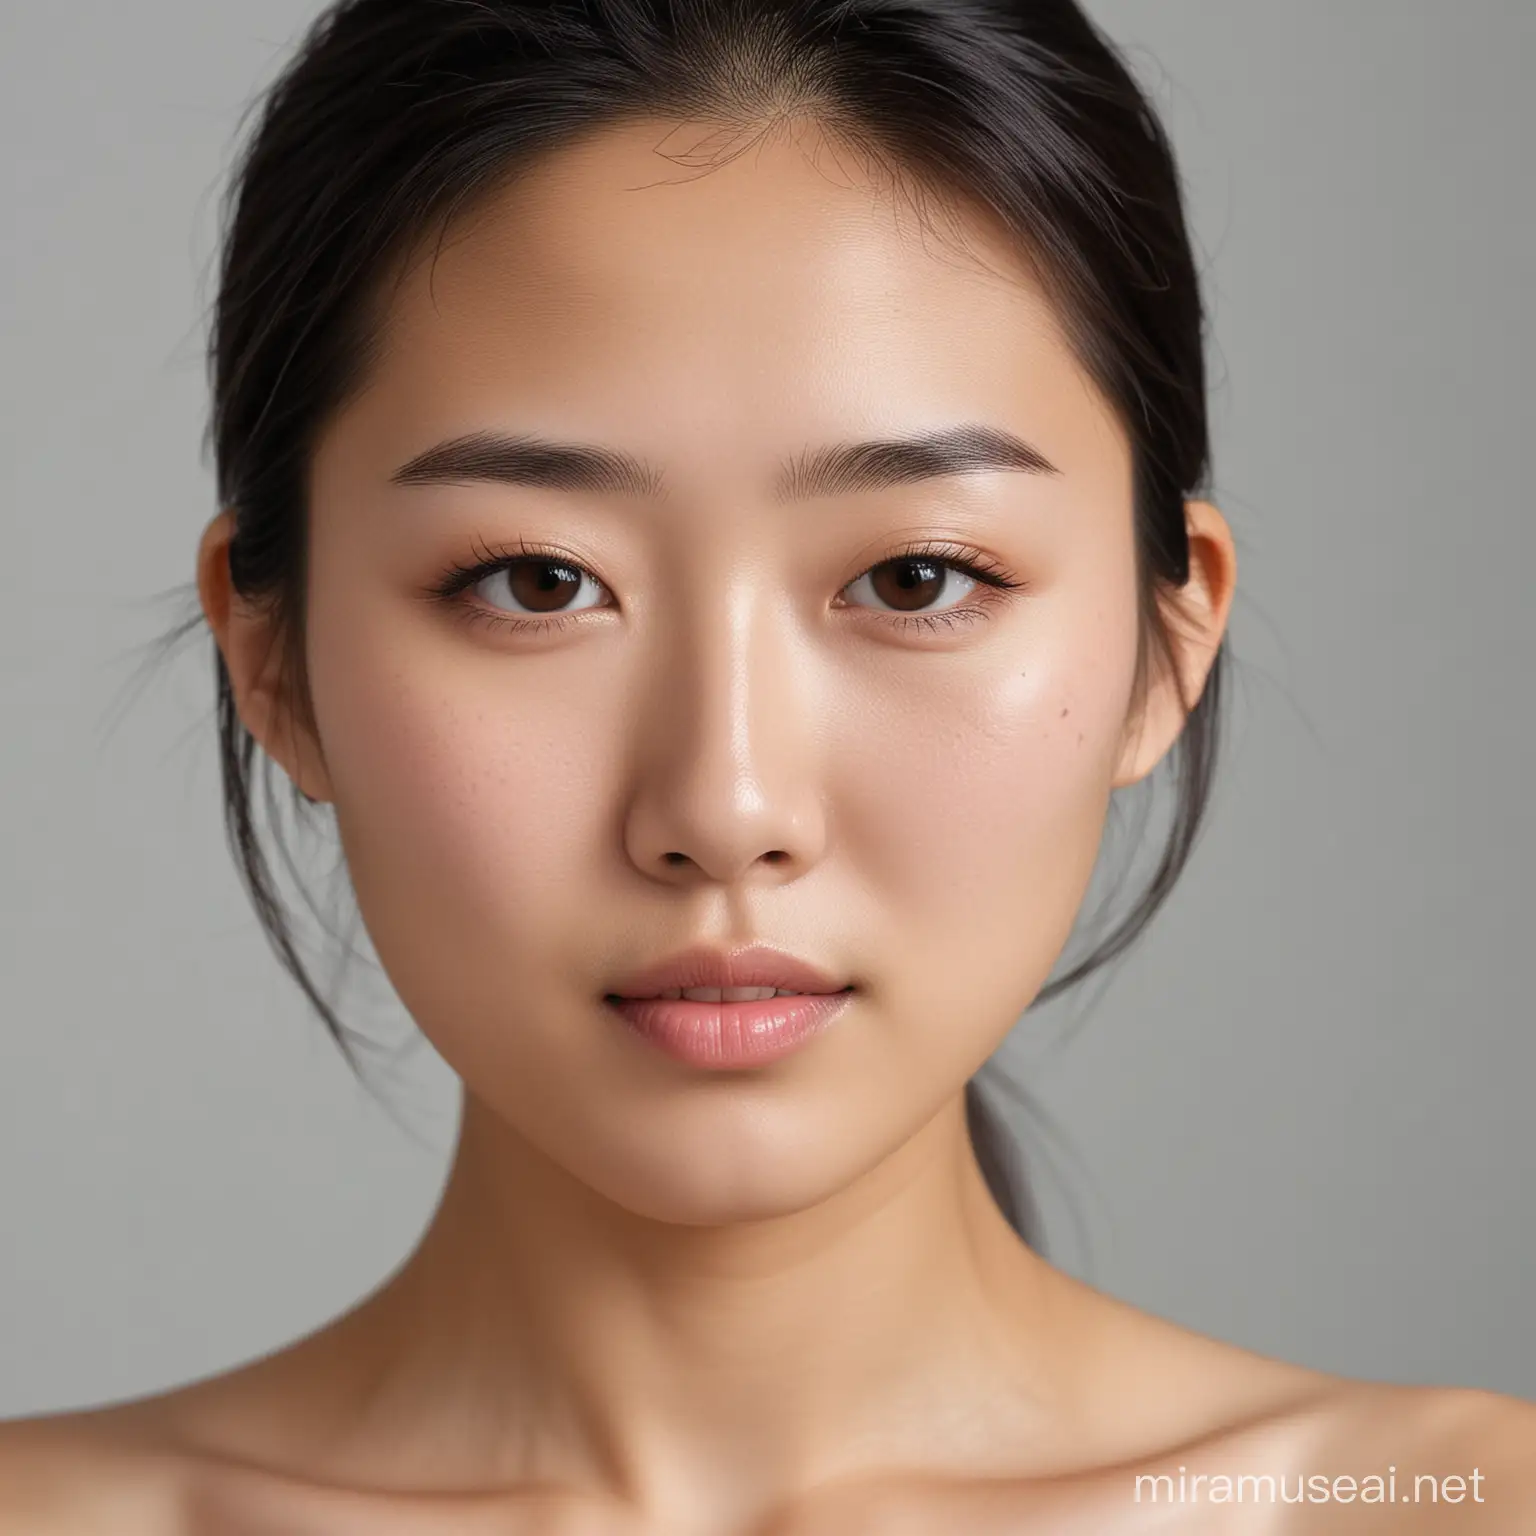 Asian Girl Upper Body Portrait with Retained Facial Details and Natural Appearance